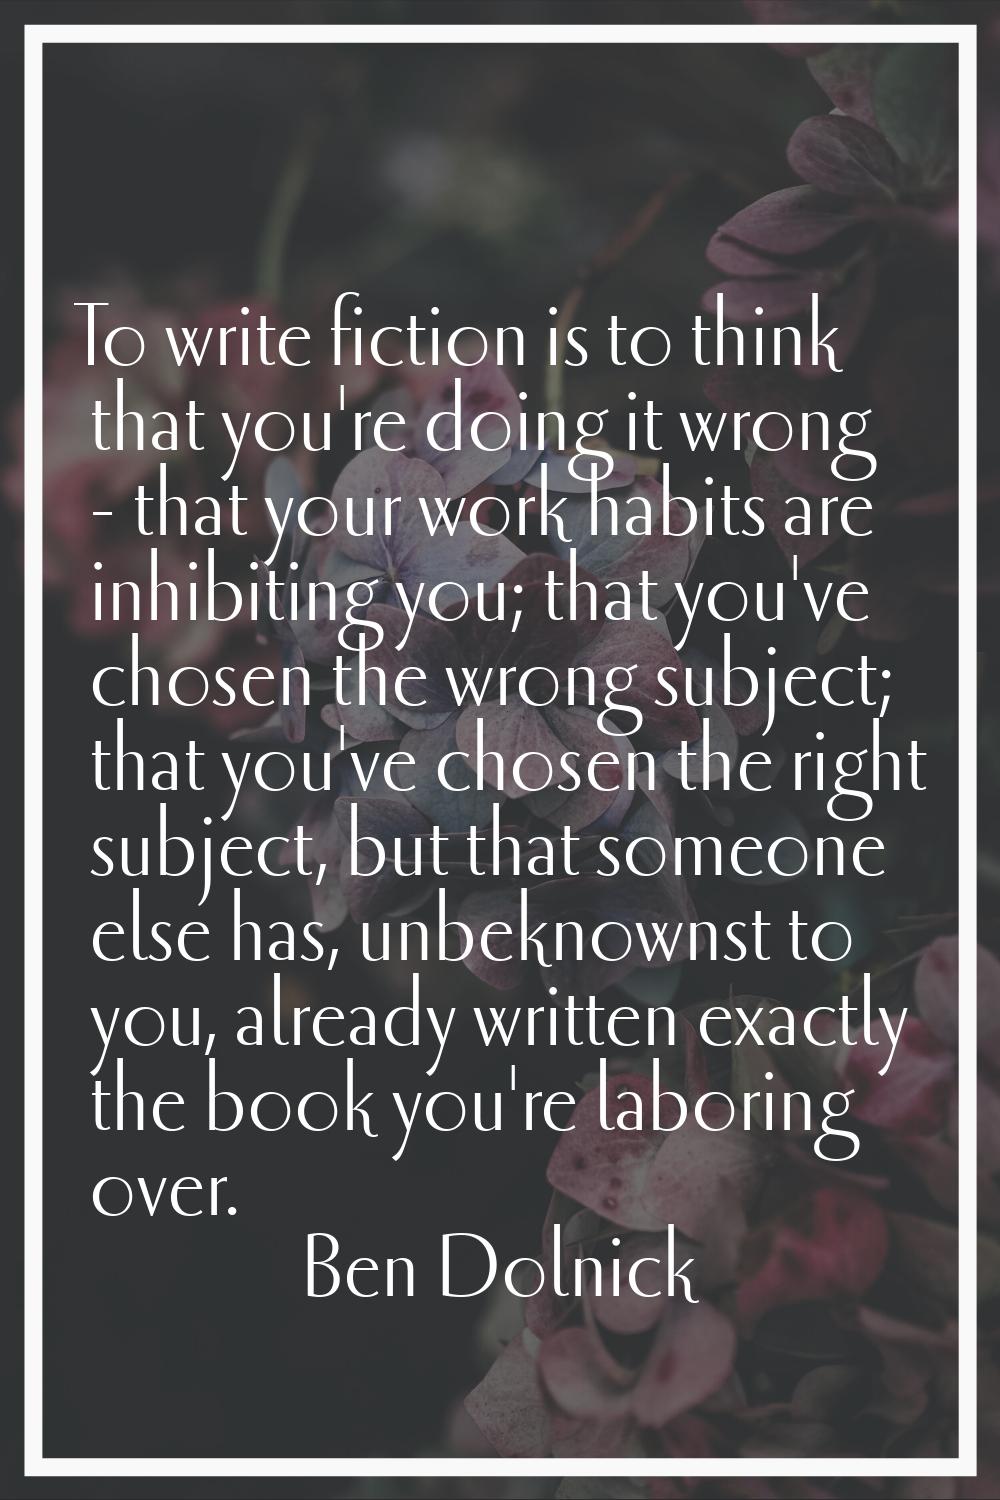 To write fiction is to think that you're doing it wrong - that your work habits are inhibiting you;